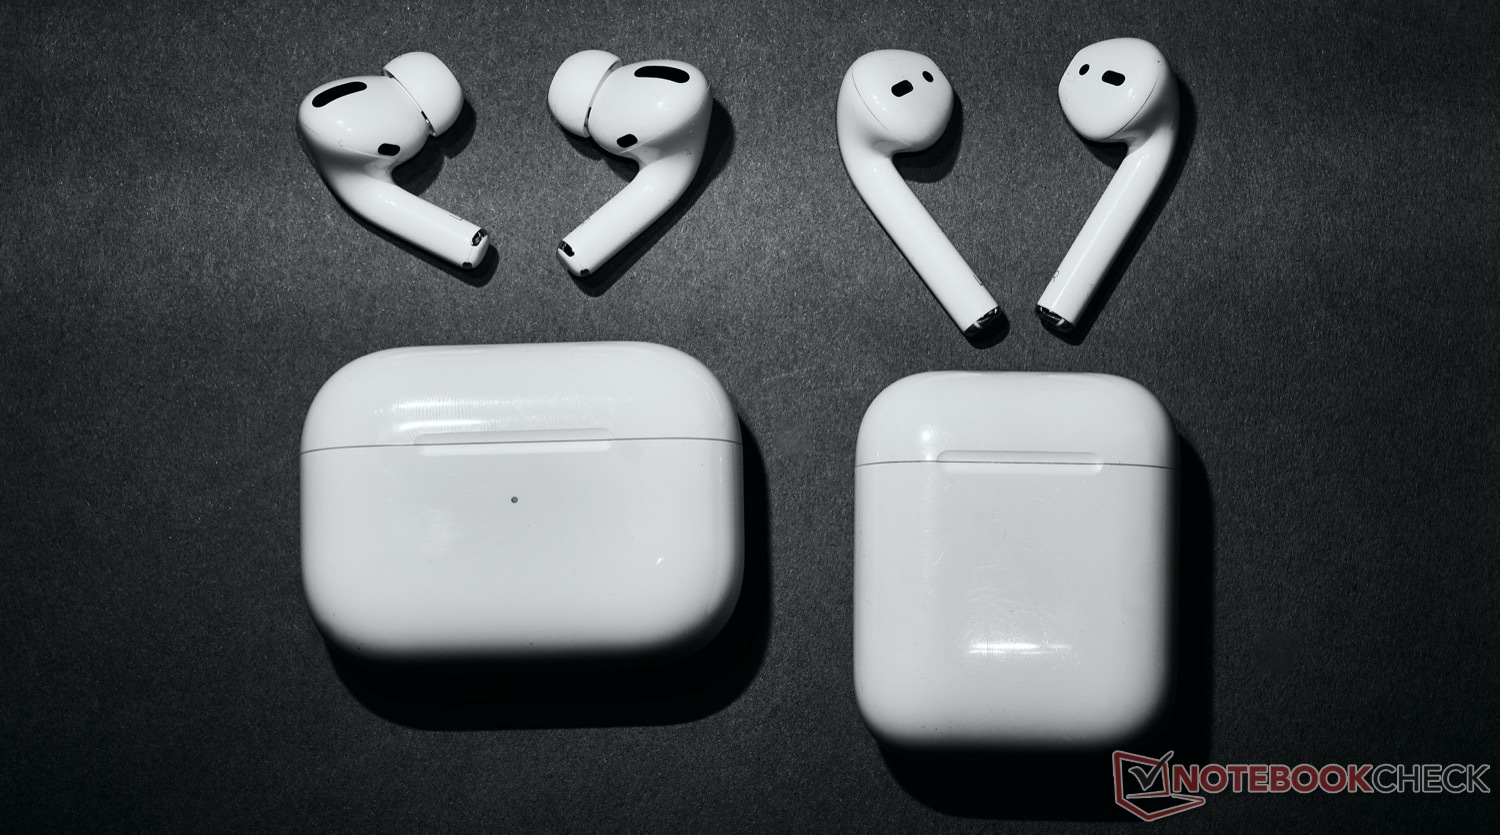 svinge fordel Mangle Apple AirPods Pro Review: Expensive earplugs or the real Hi-Fi deal? -  NotebookCheck.net Reviews